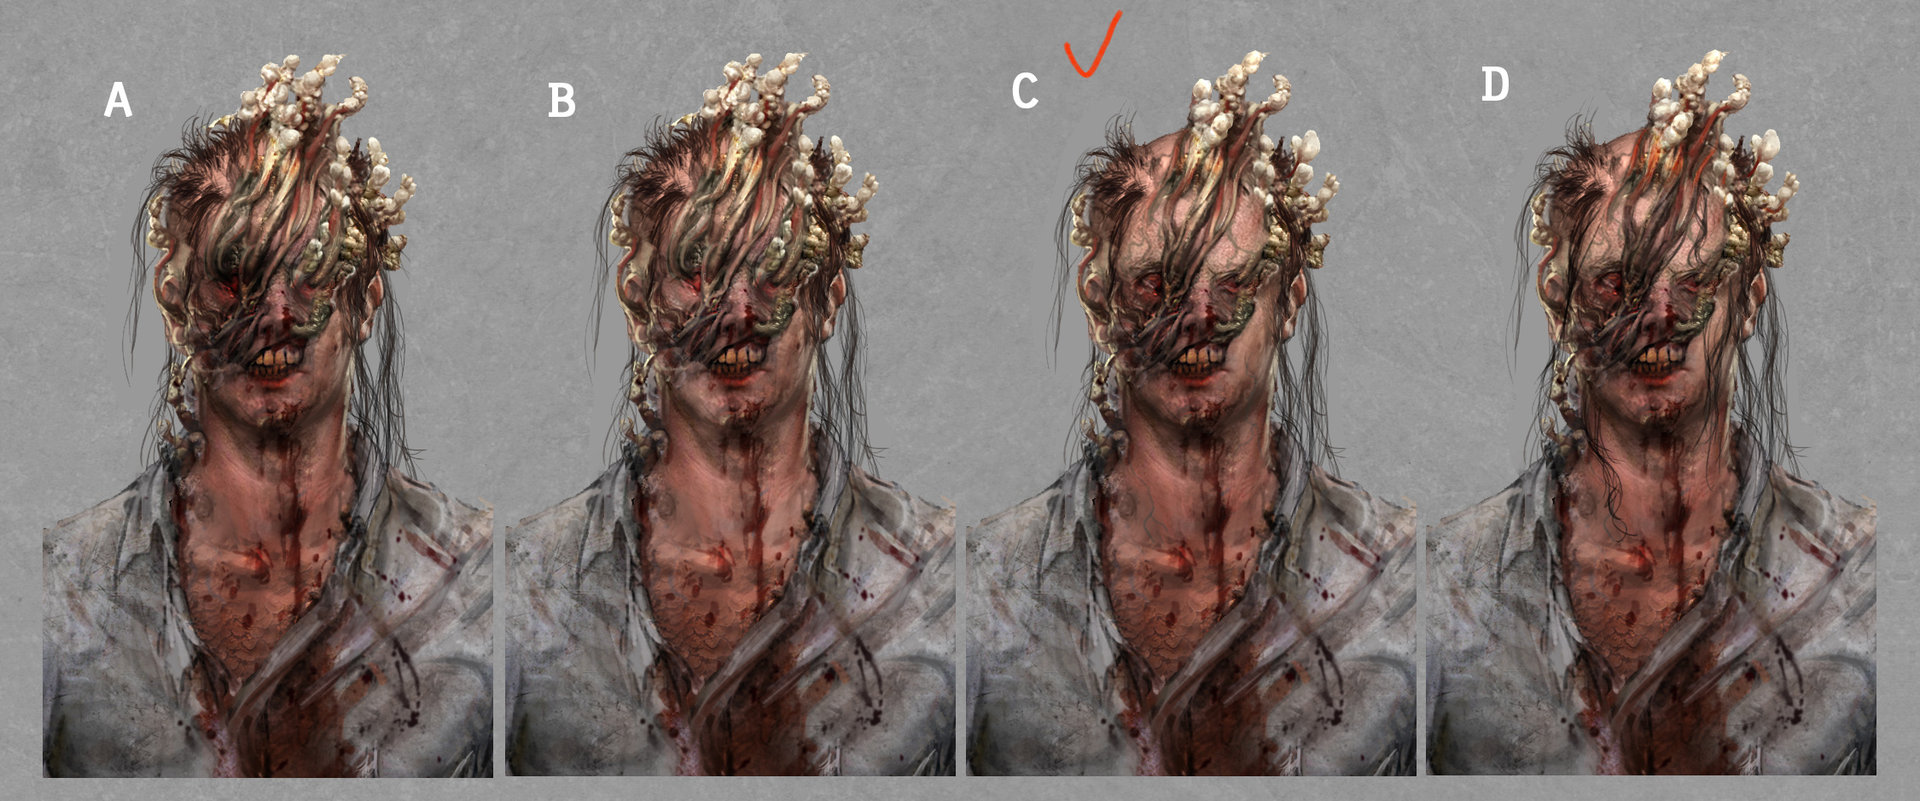 What Are Clickers in 'The Last of Us'? Clicker Origins, Characteristics  Explained